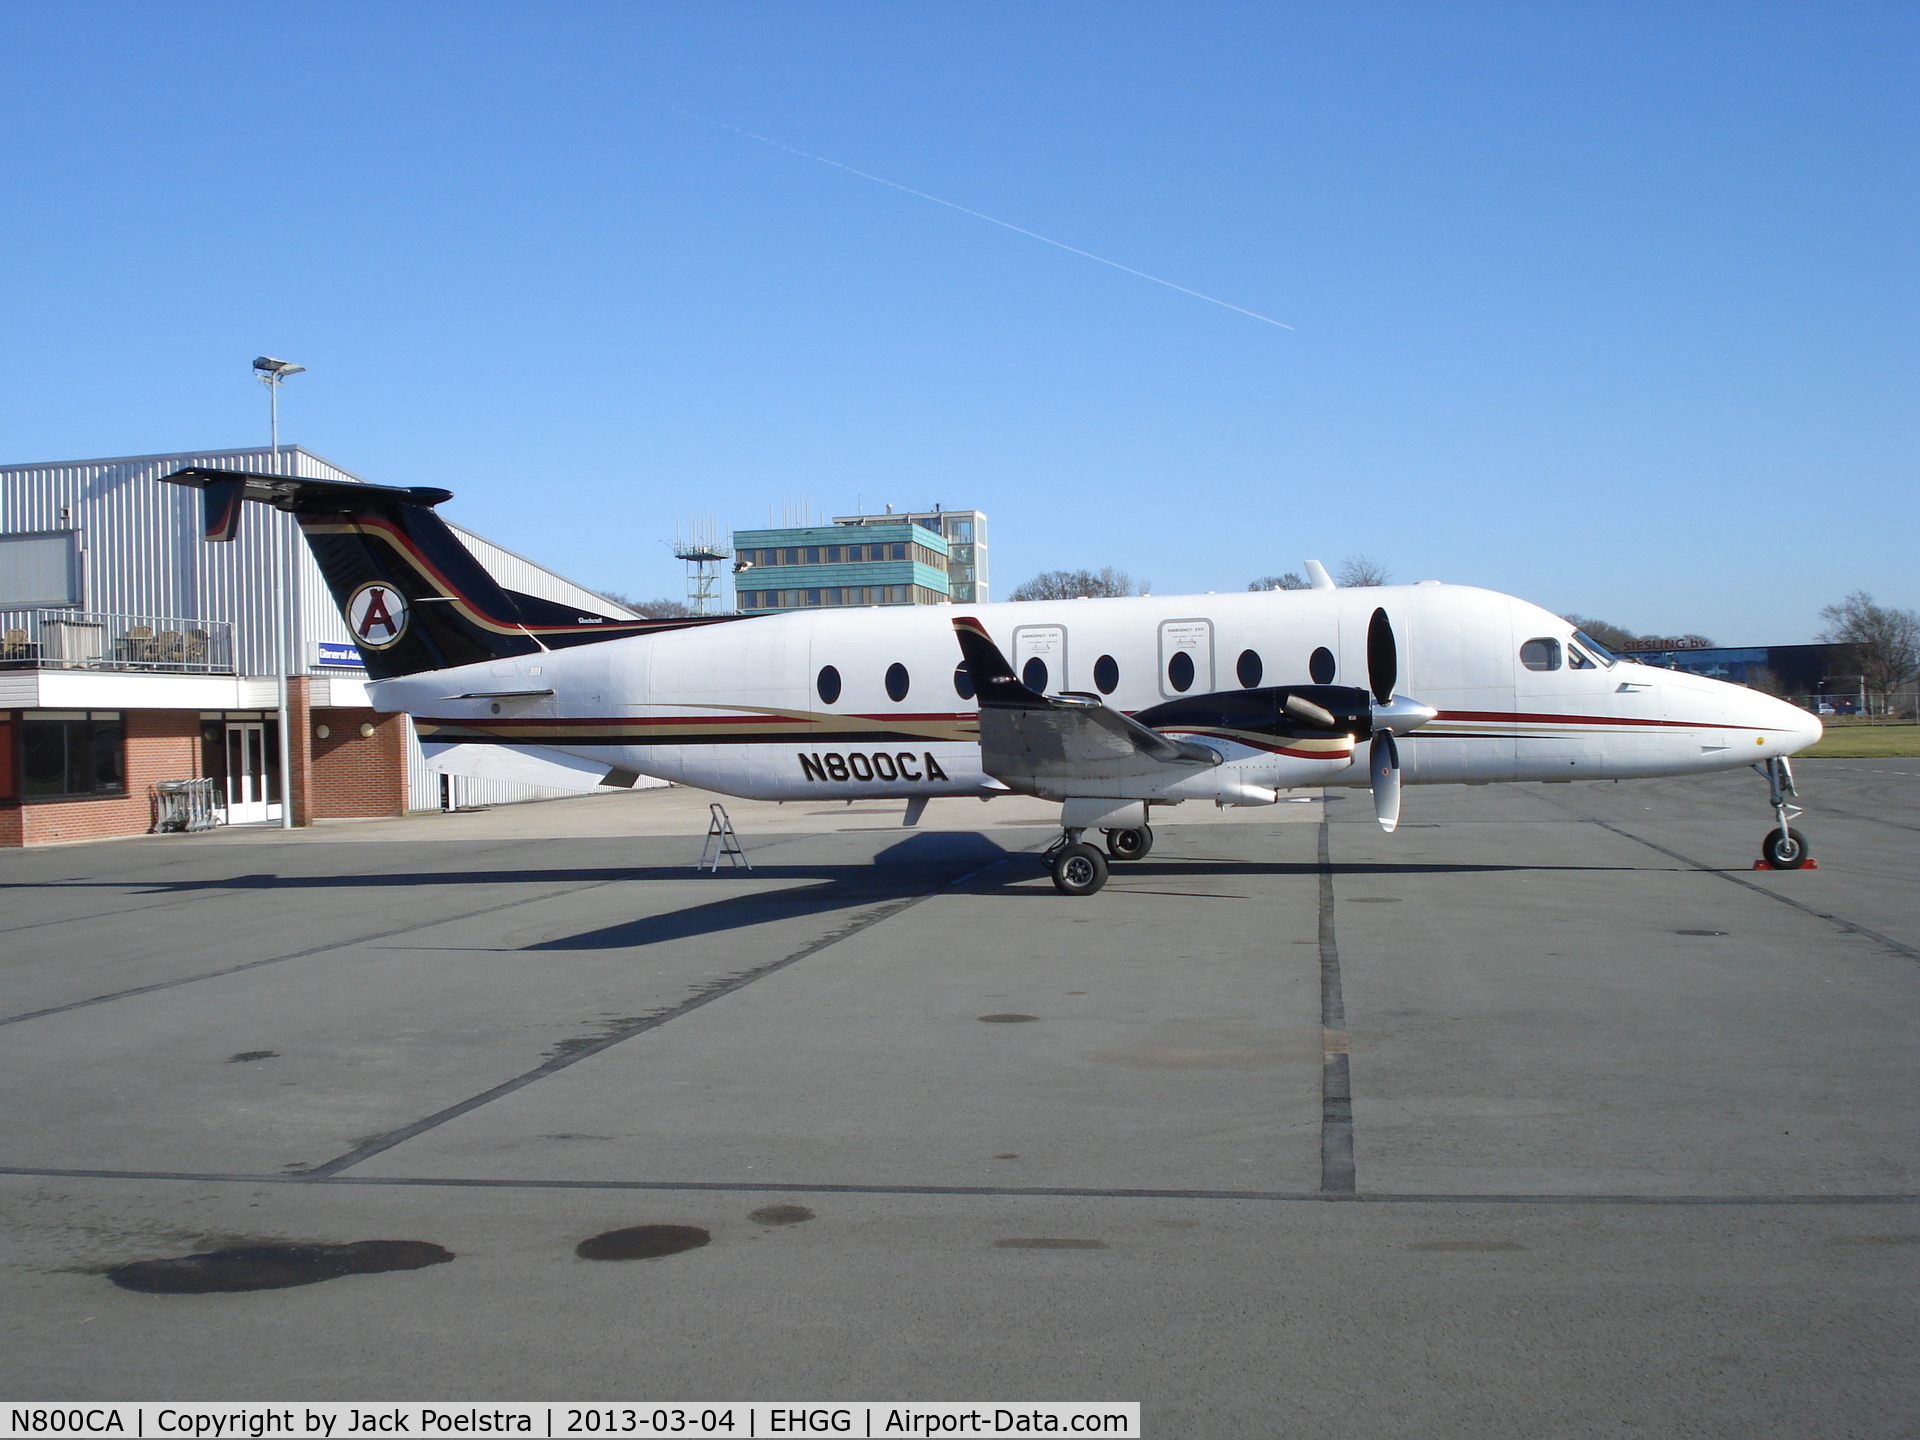 N800CA, 1999 Beech 1900D C/N UE-383, in front of General Aviation Terminal at GRQ